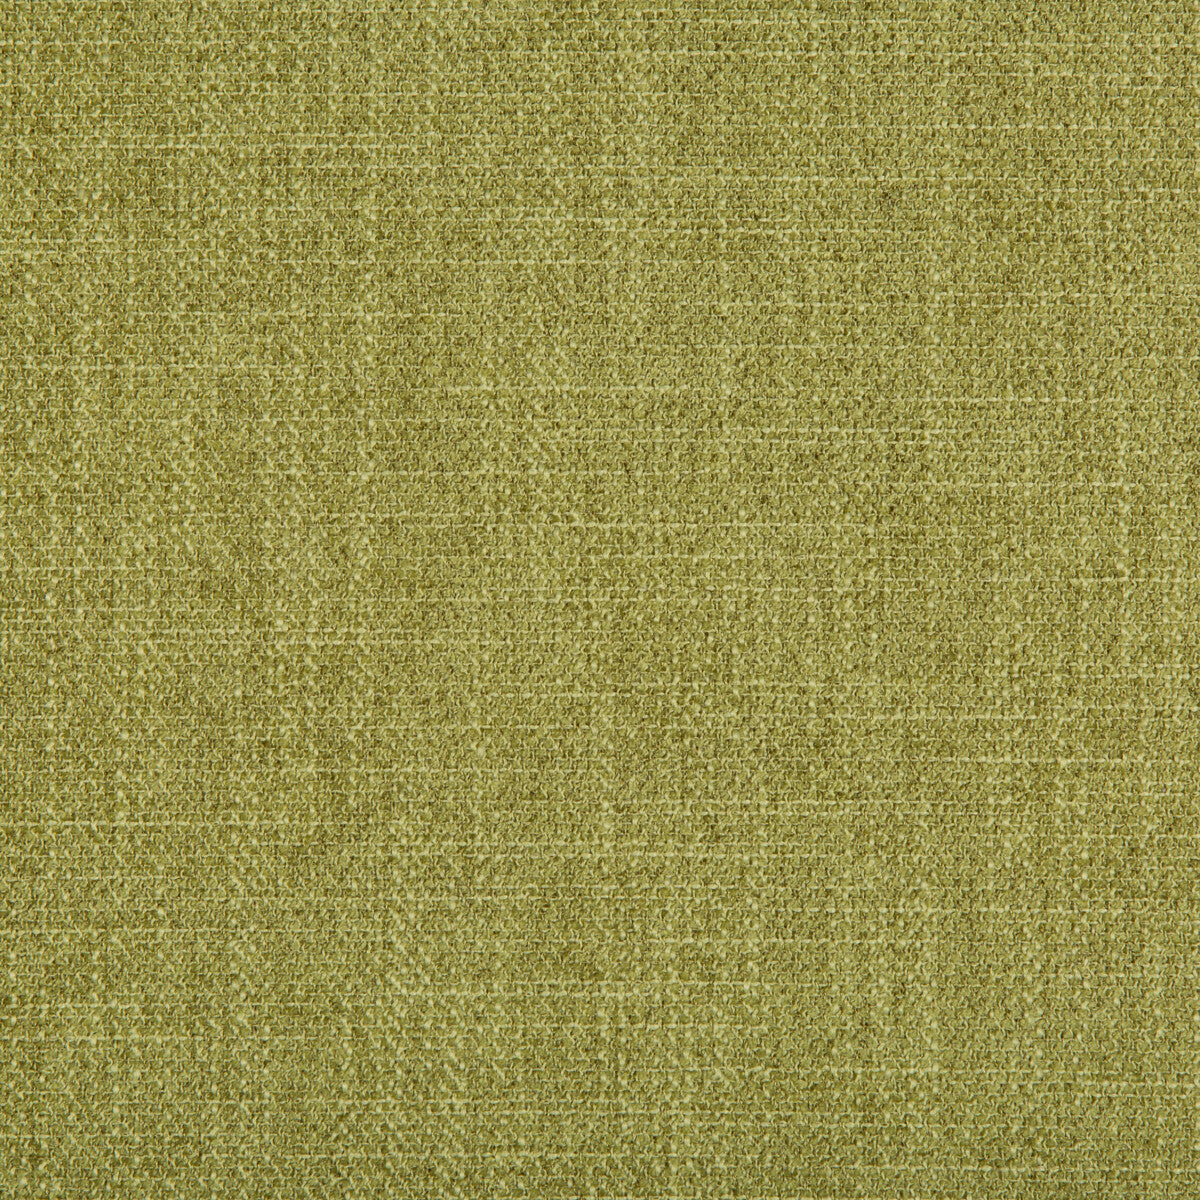 Kravet Contract fabric in 35404-13 color - pattern 35404.13.0 - by Kravet Contract in the Crypton Incase collection